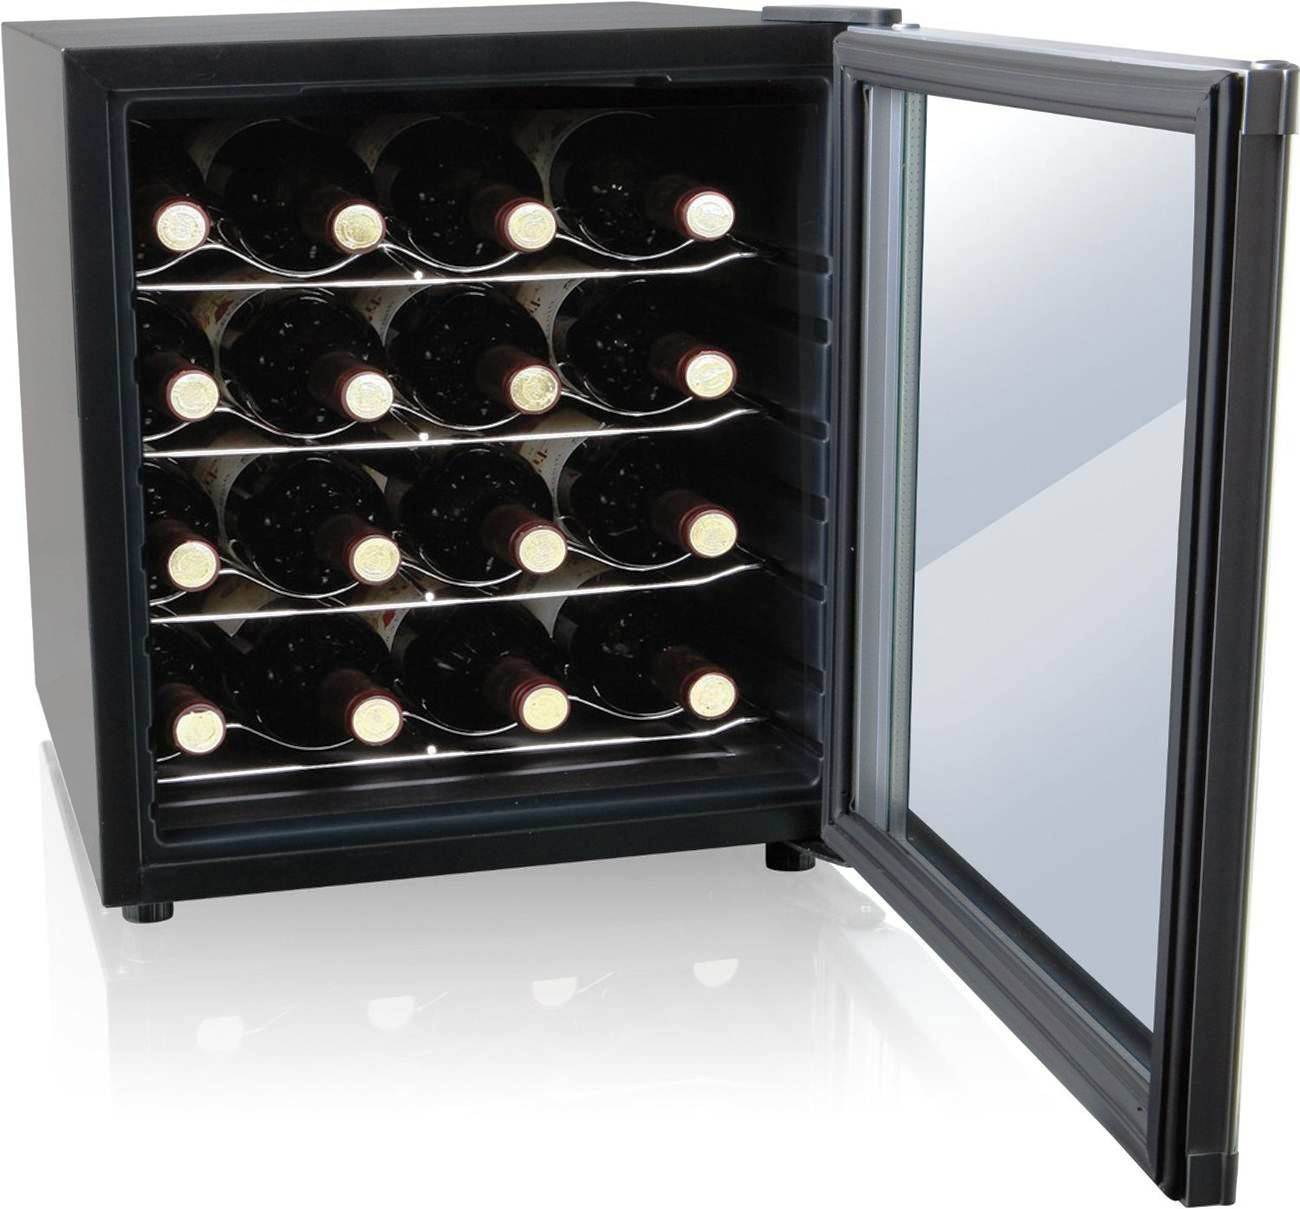 5 Top Wine Chillers and Wine Coolers In the Indian Market